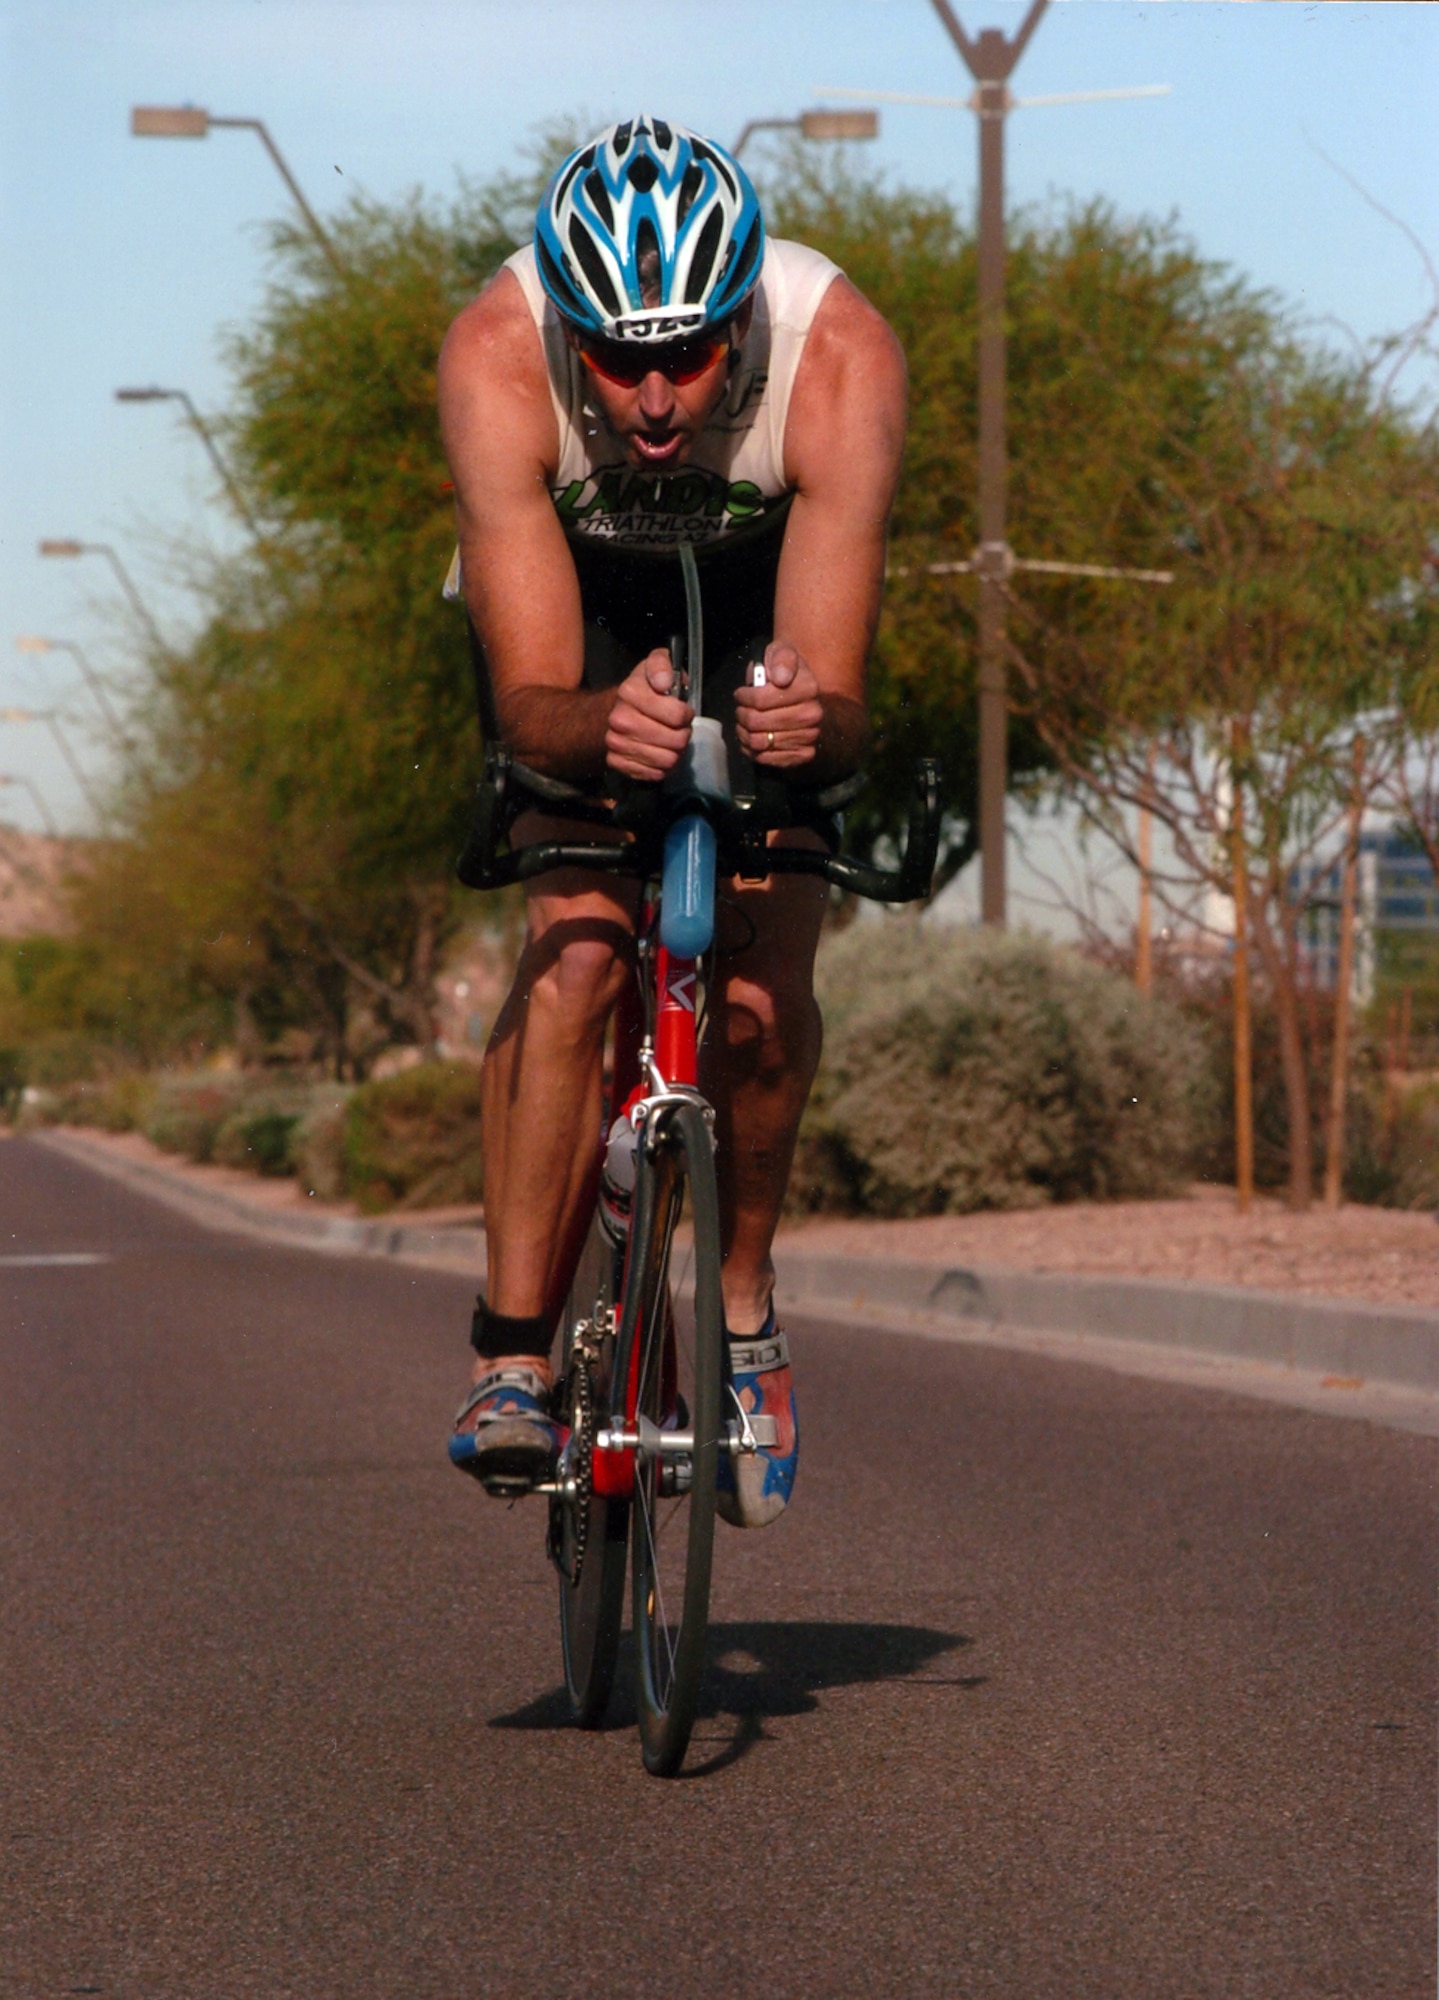 Lt. Col. Geoff Cleveland, 301st Fighter Squadron, rides his bike at the 2006 Ironman Triathlon in Tempe Town Center April 9. (Courtesy photo)